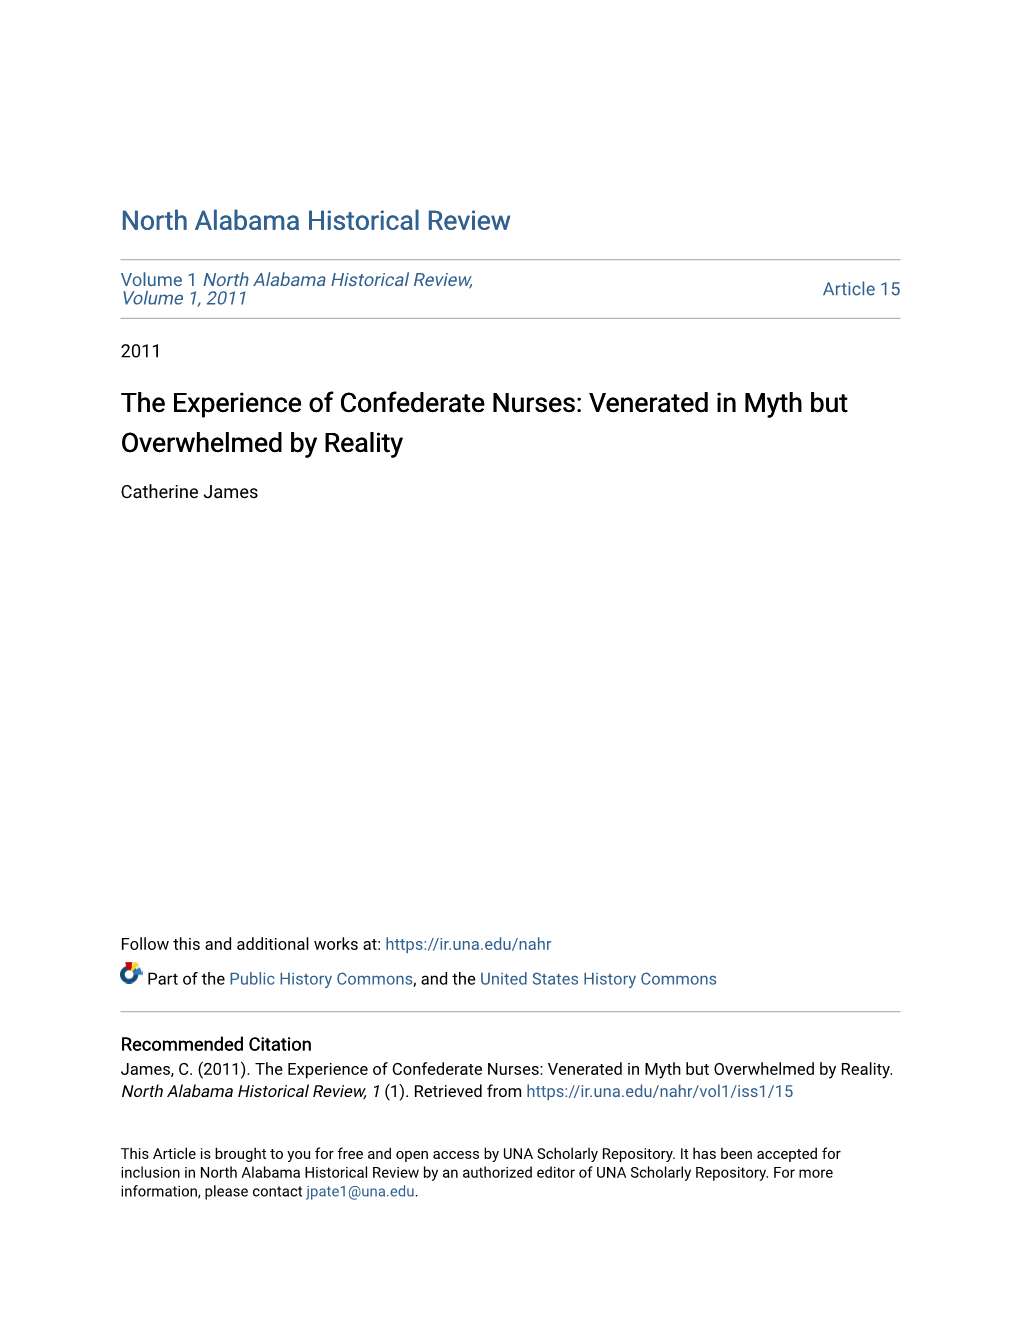 The Experience of Confederate Nurses: Venerated in Myth but Overwhelmed by Reality